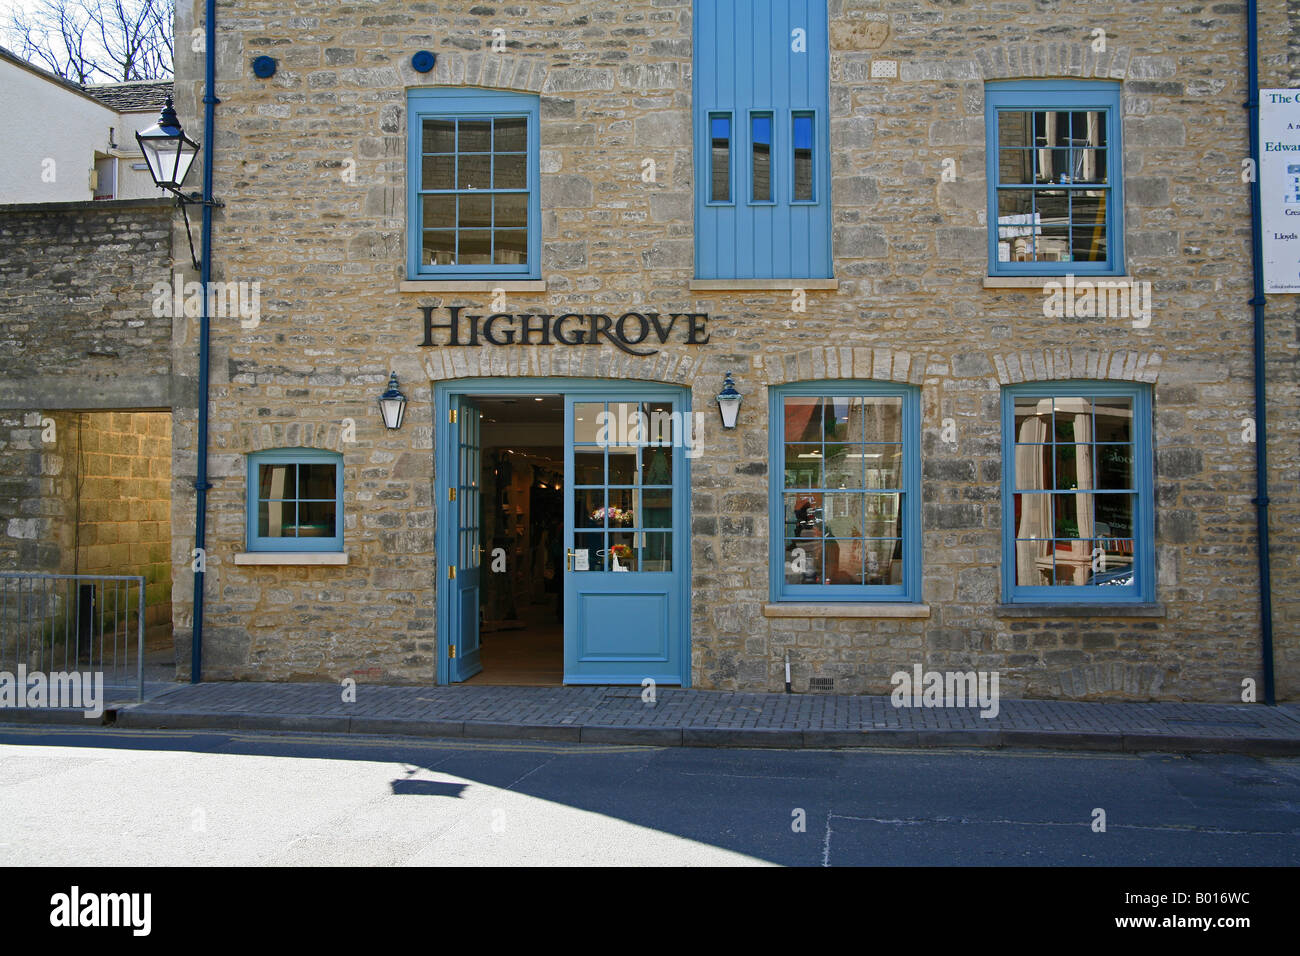 Highgrove - HRH The Prince of Wales shop in Tetbury Gloucestershire UK Stock Photo